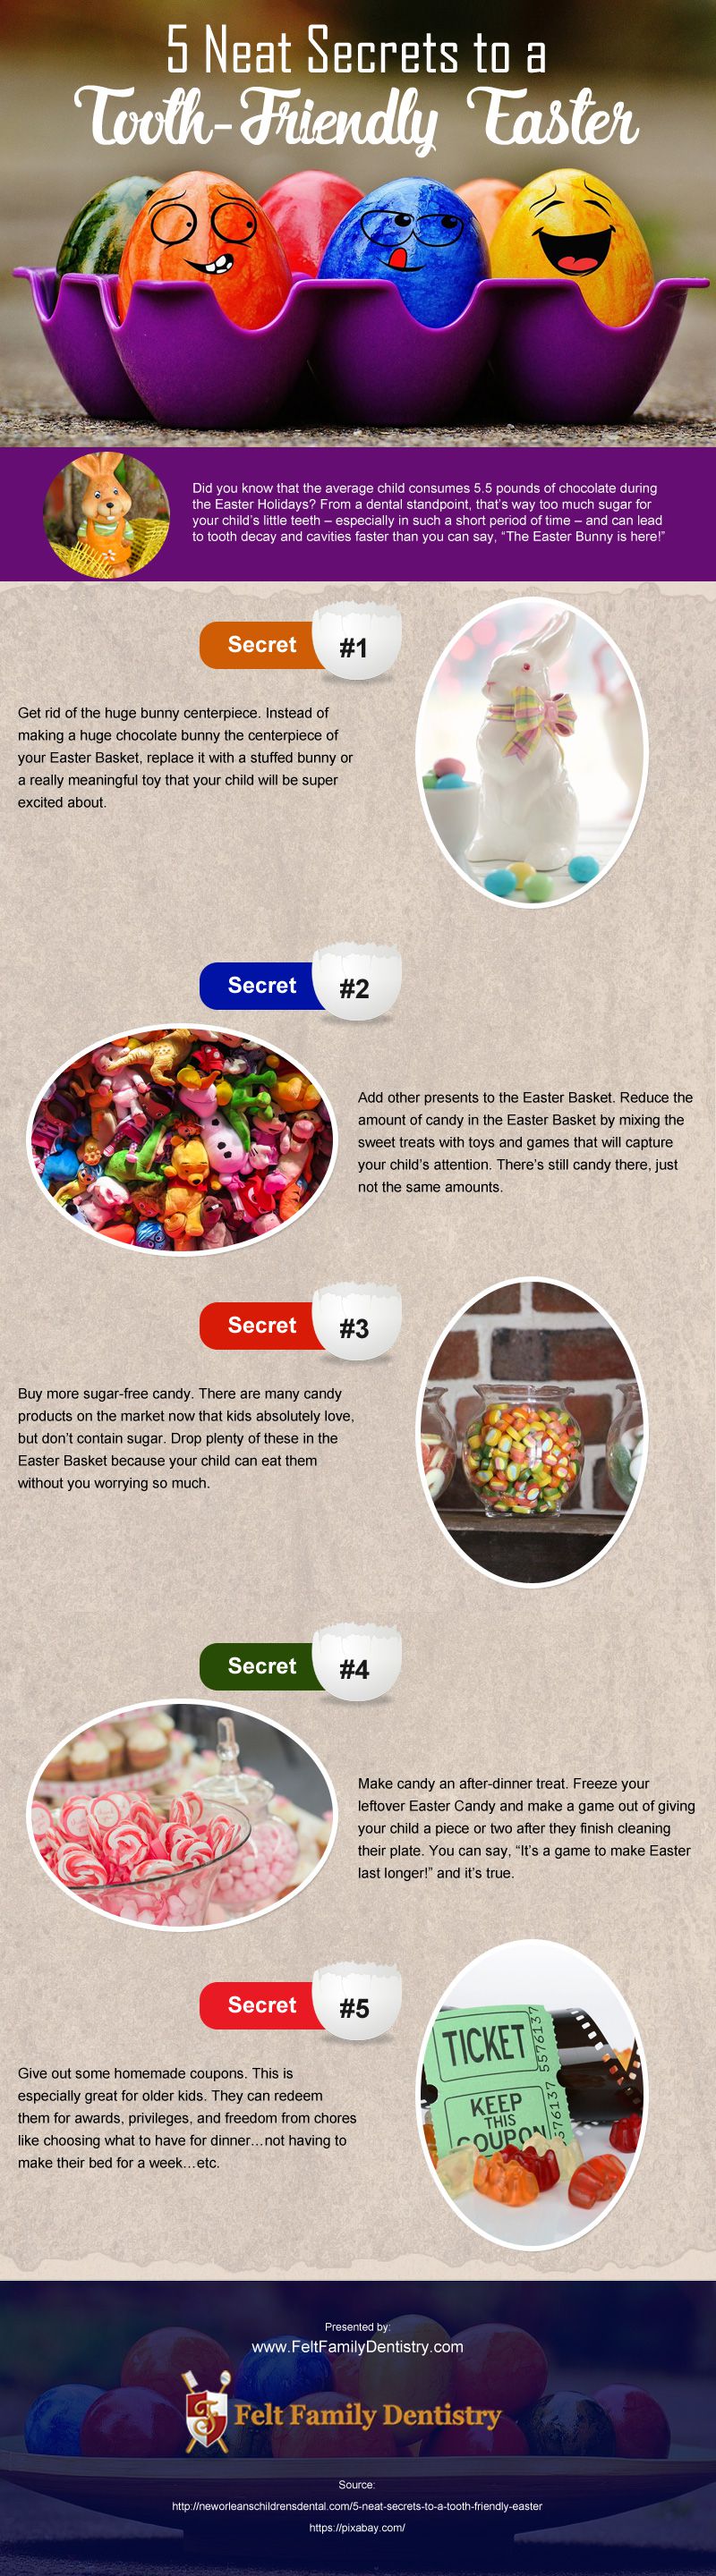 5 Neat Secrets to a Tooth-Friendly Easter [infographic]